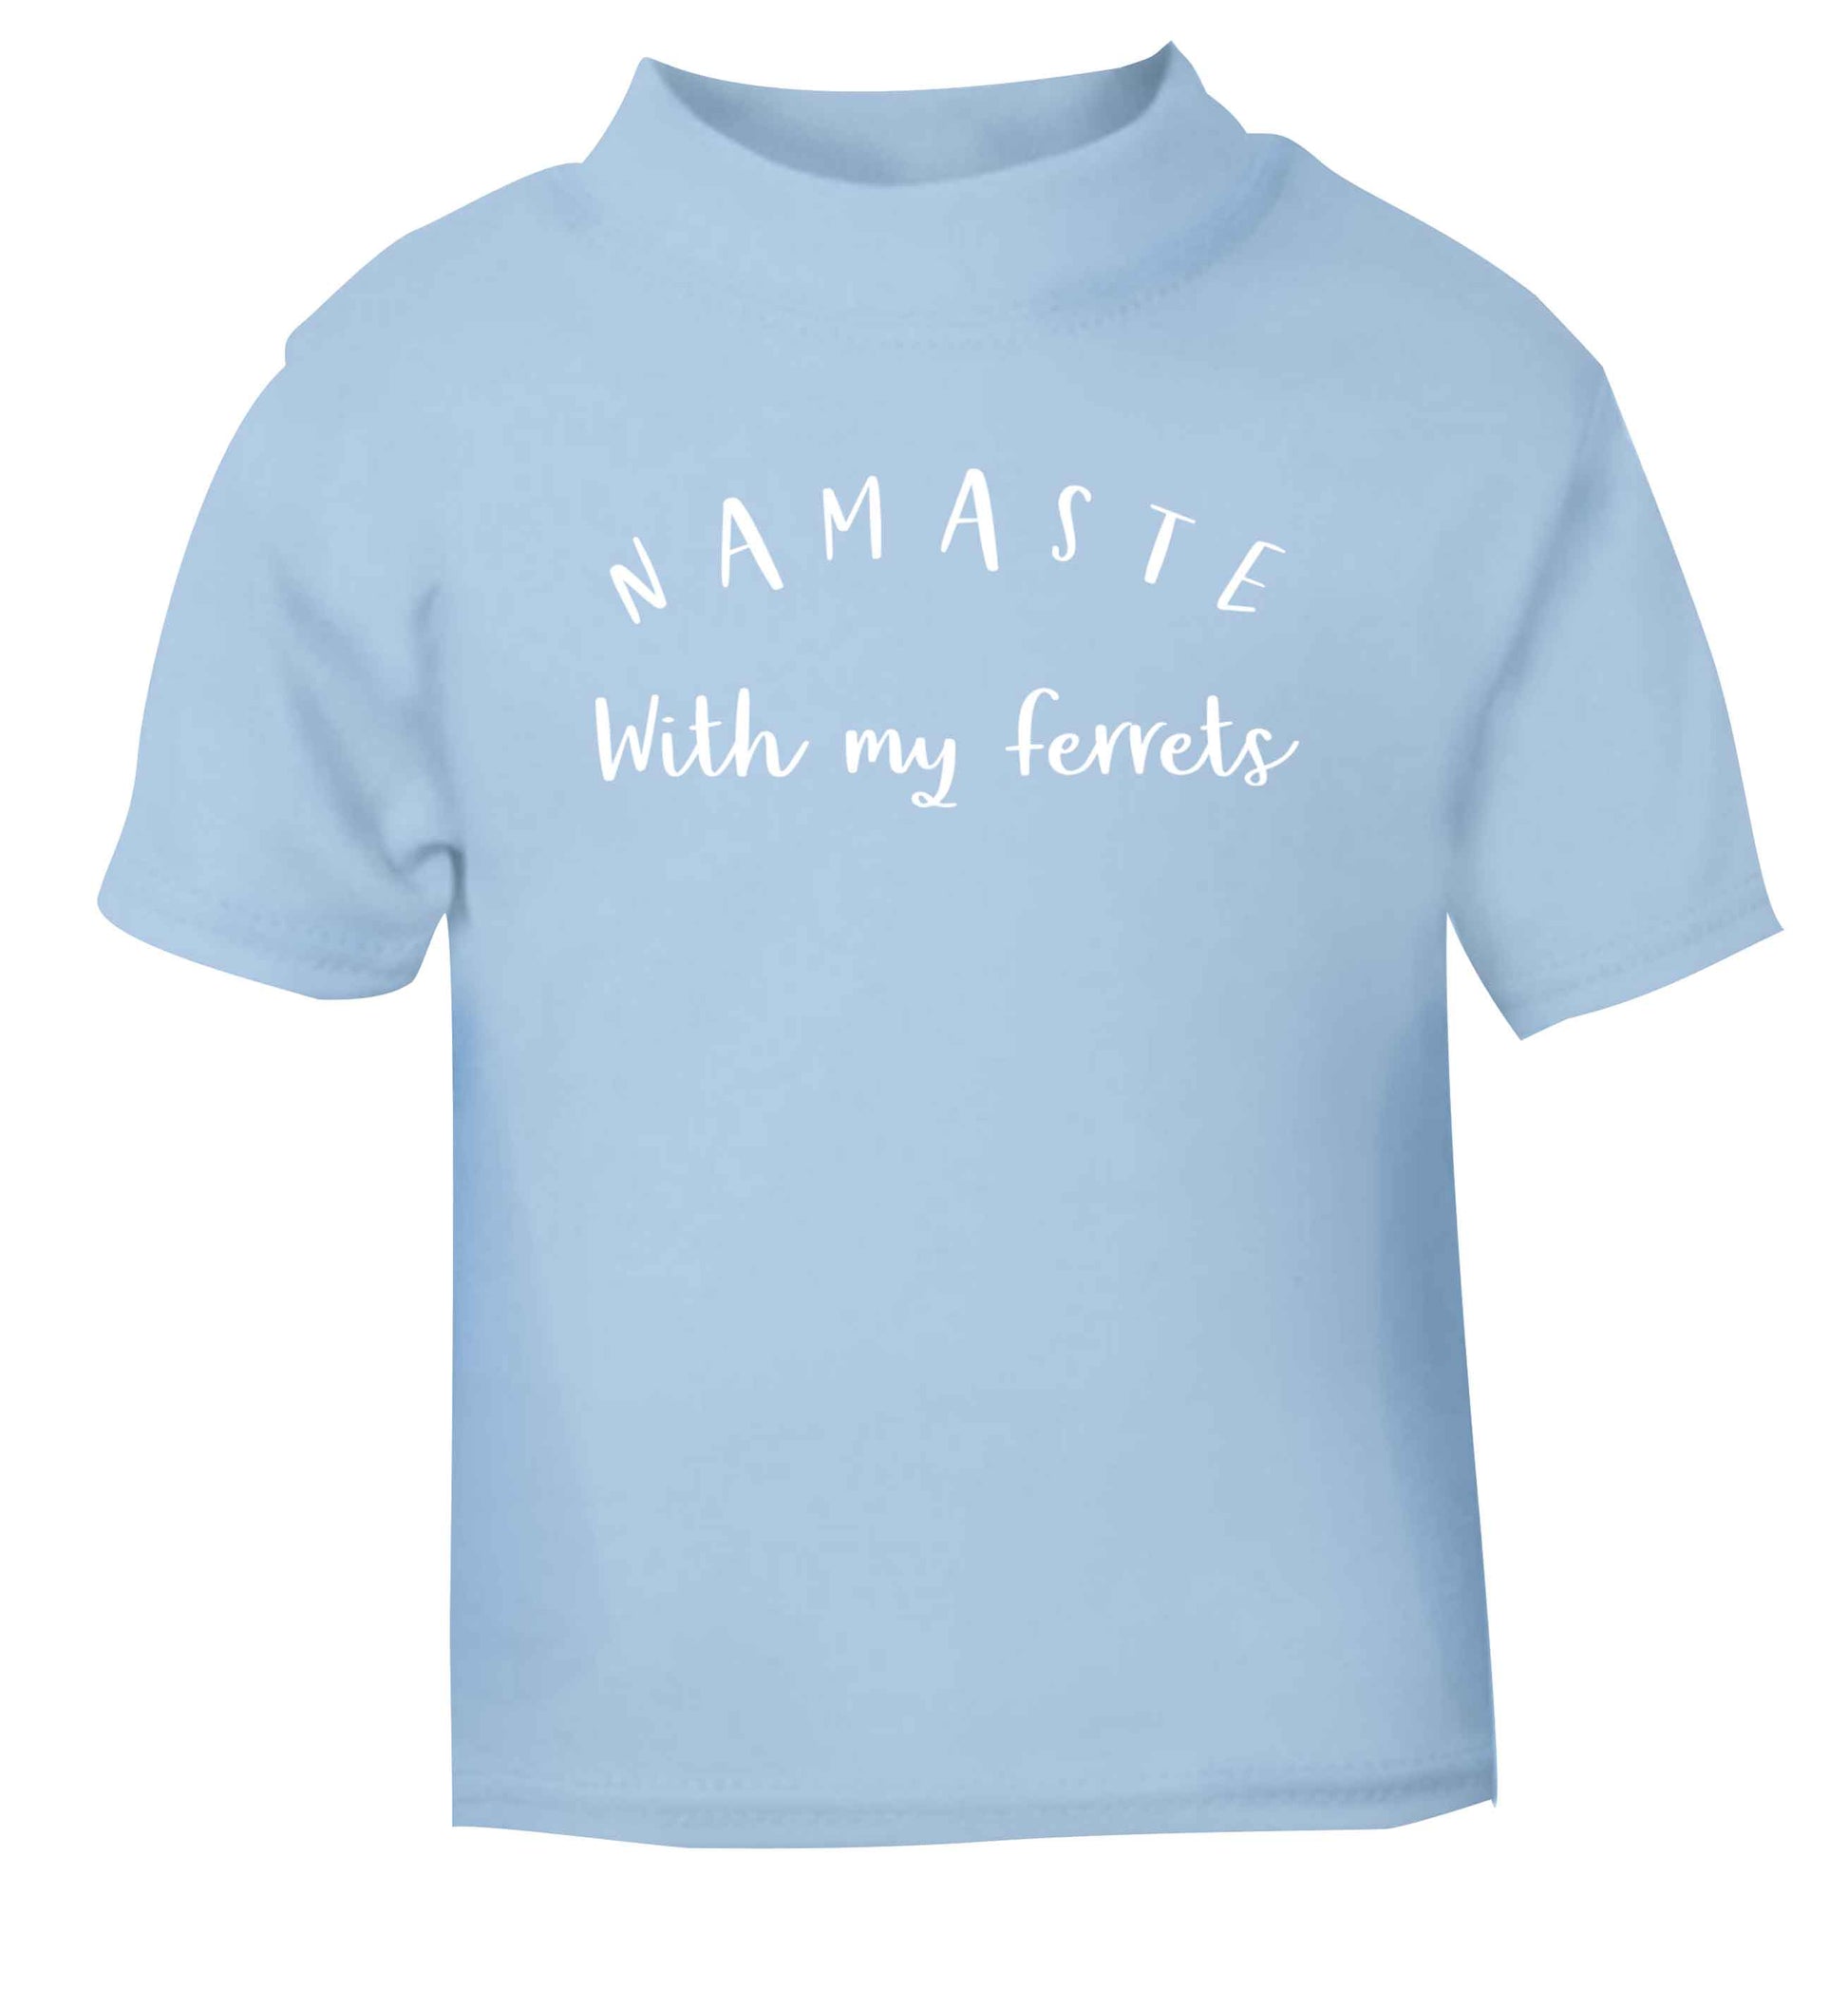 Namaste with my ferrets light blue Baby Toddler Tshirt 2 Years